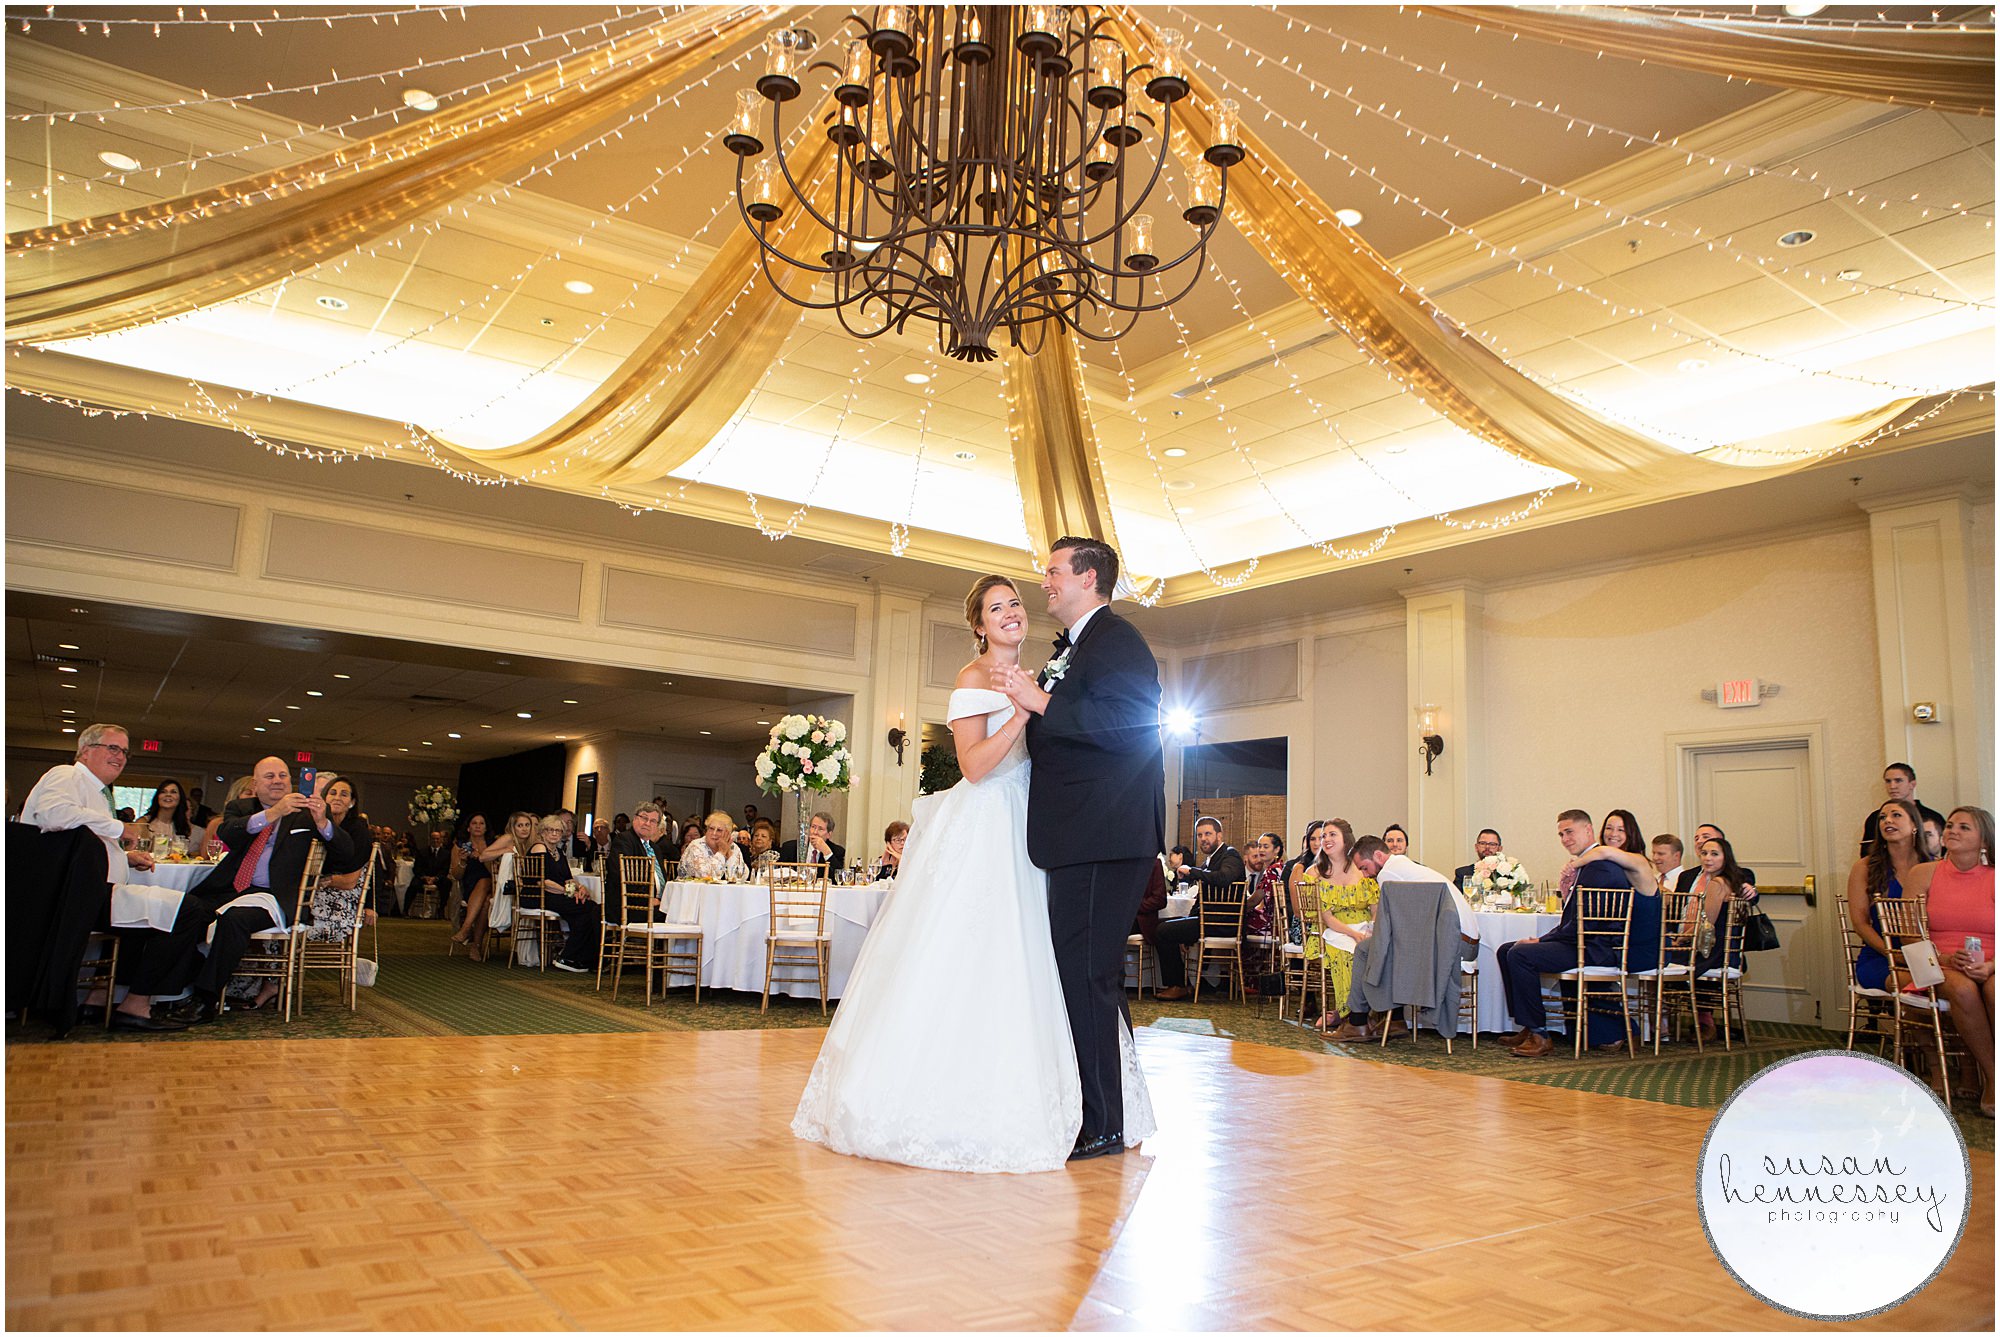 First dance for couple at Rehoboth Beach Country Club wedding